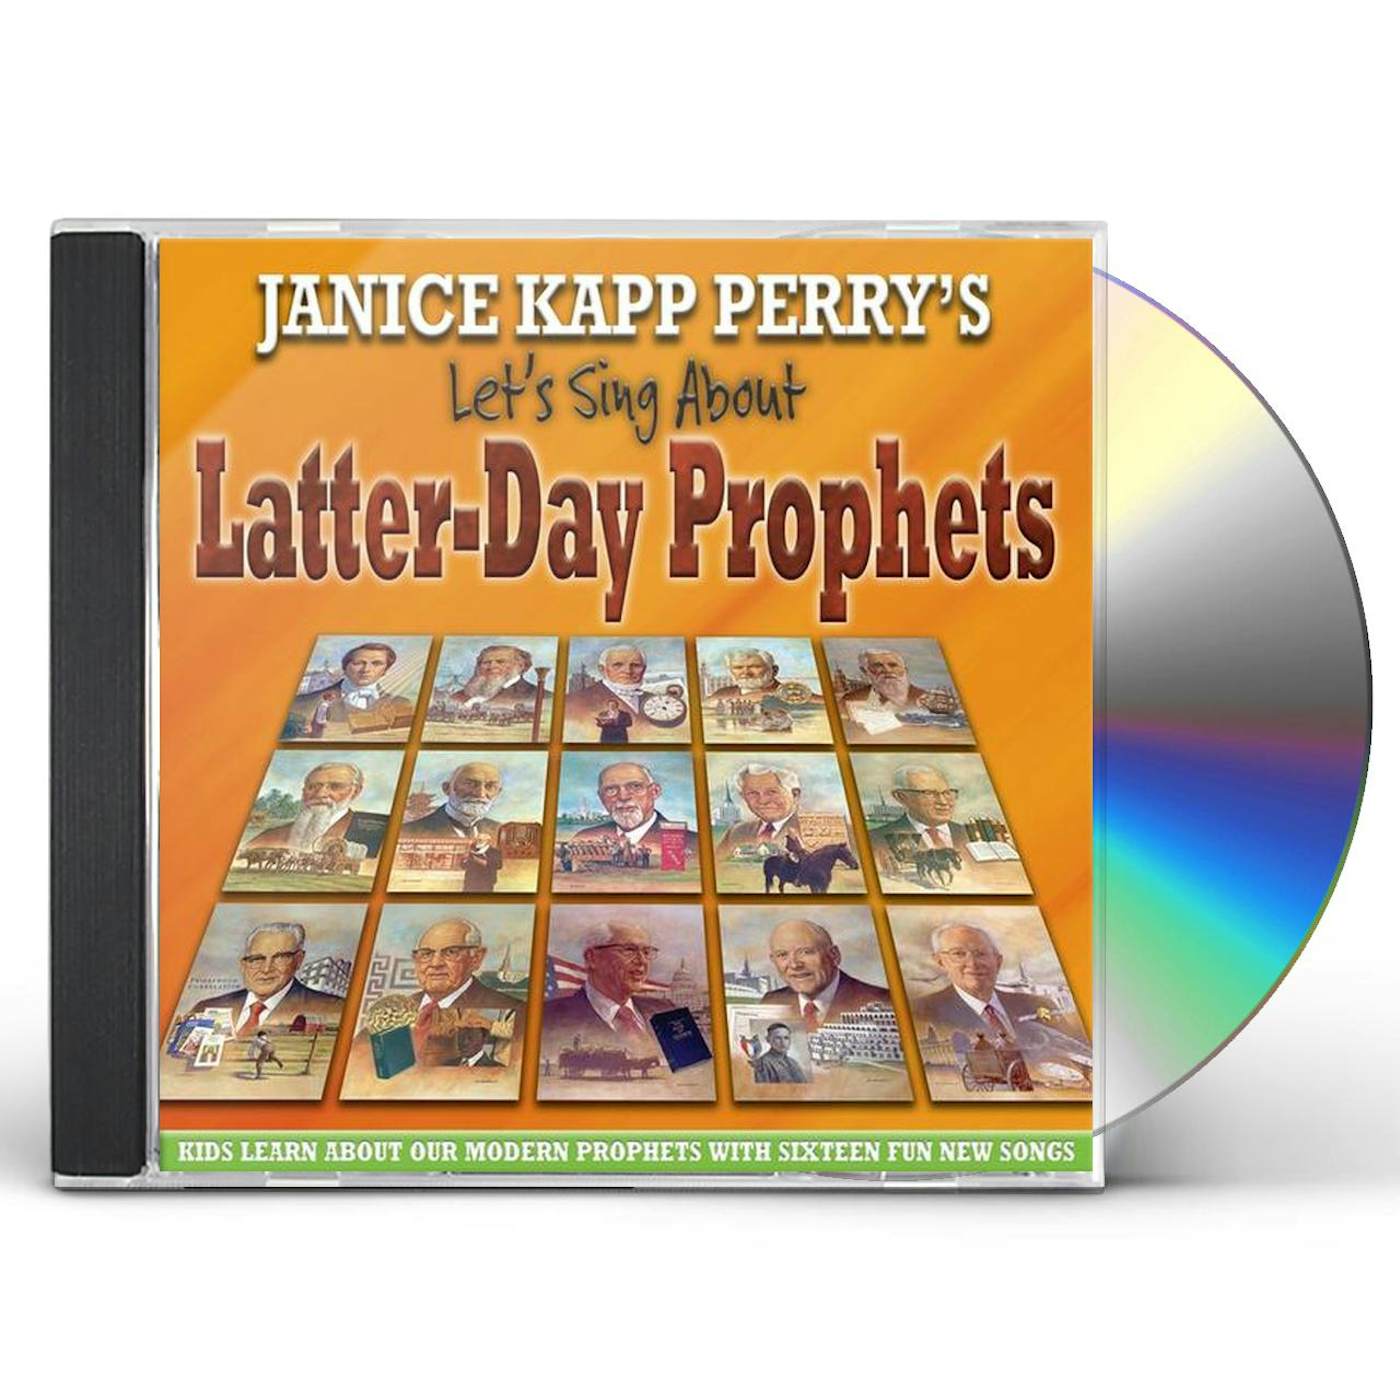 Janice Kapp Perry LET'S SING ABOUT LATTER-DAY PROPHETS CD